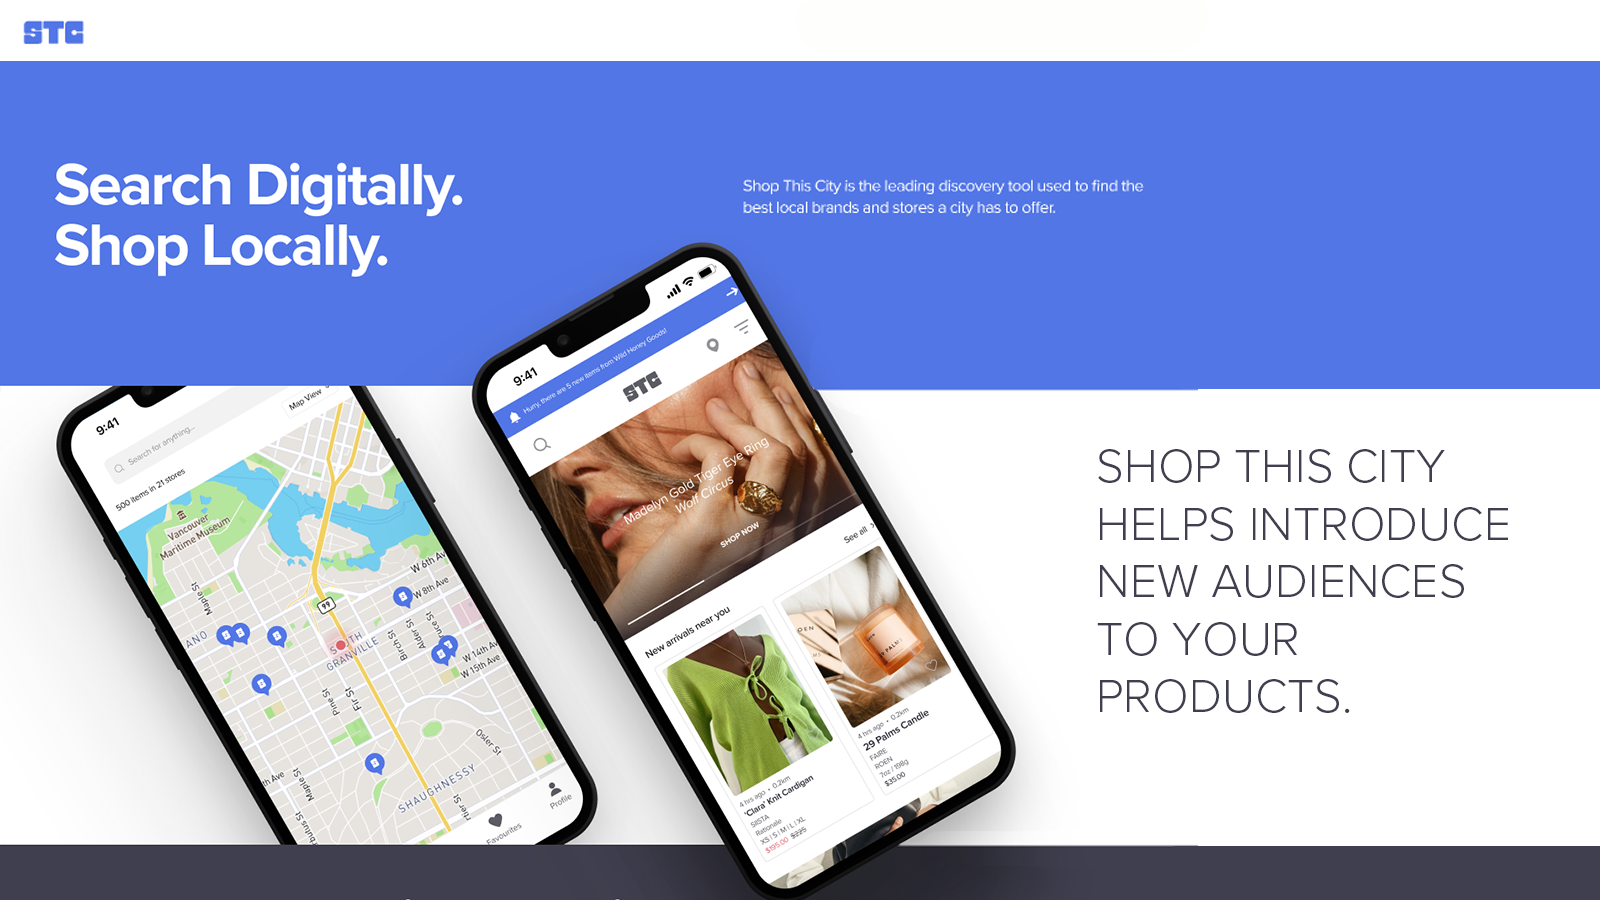 Connect, share and promote your products with Shop This City